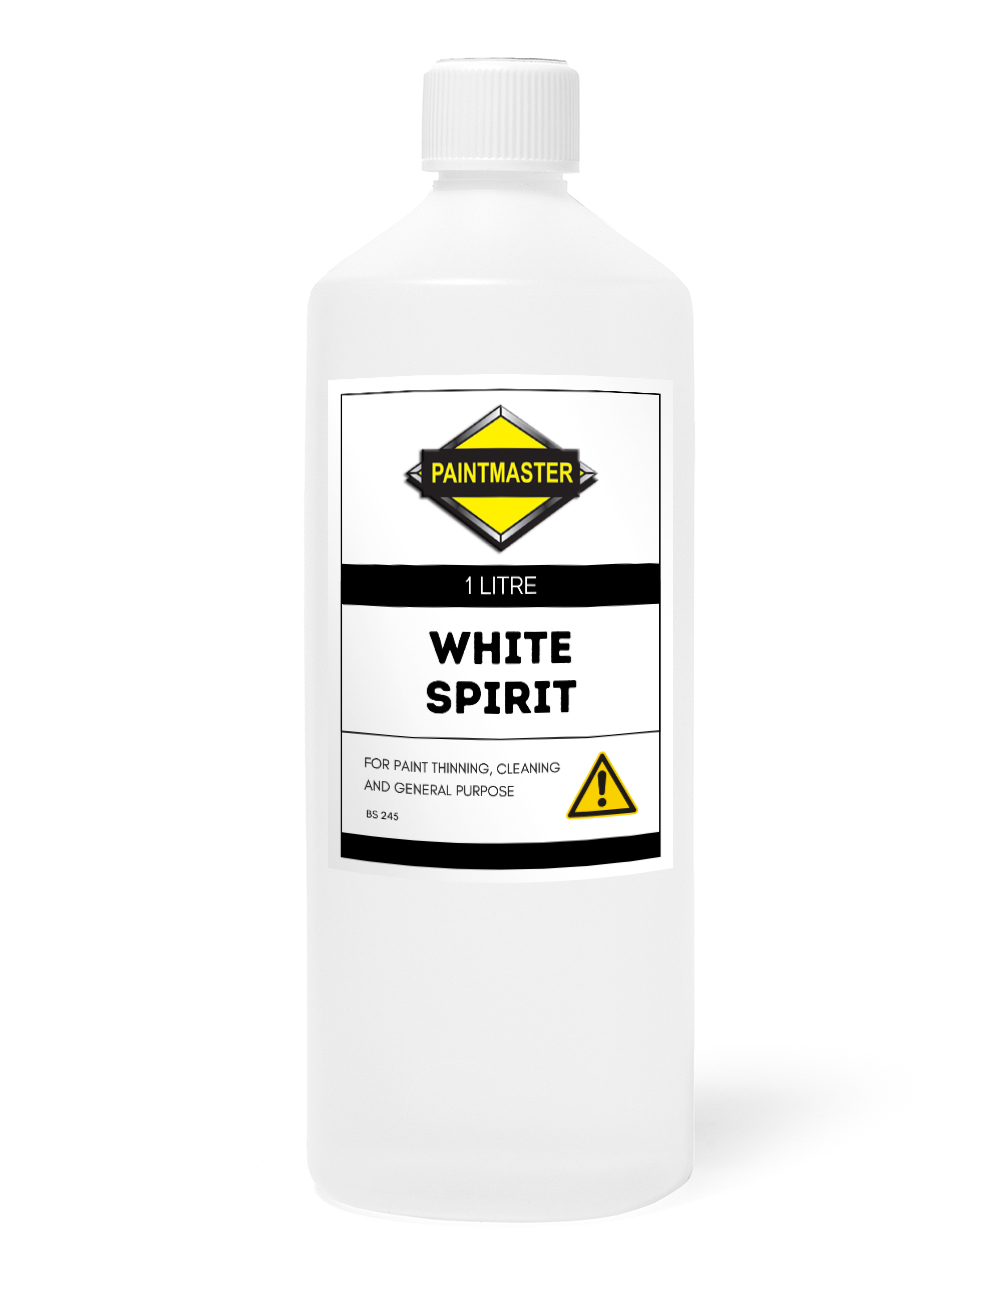 Is White Spirit Cleaning Alcohol